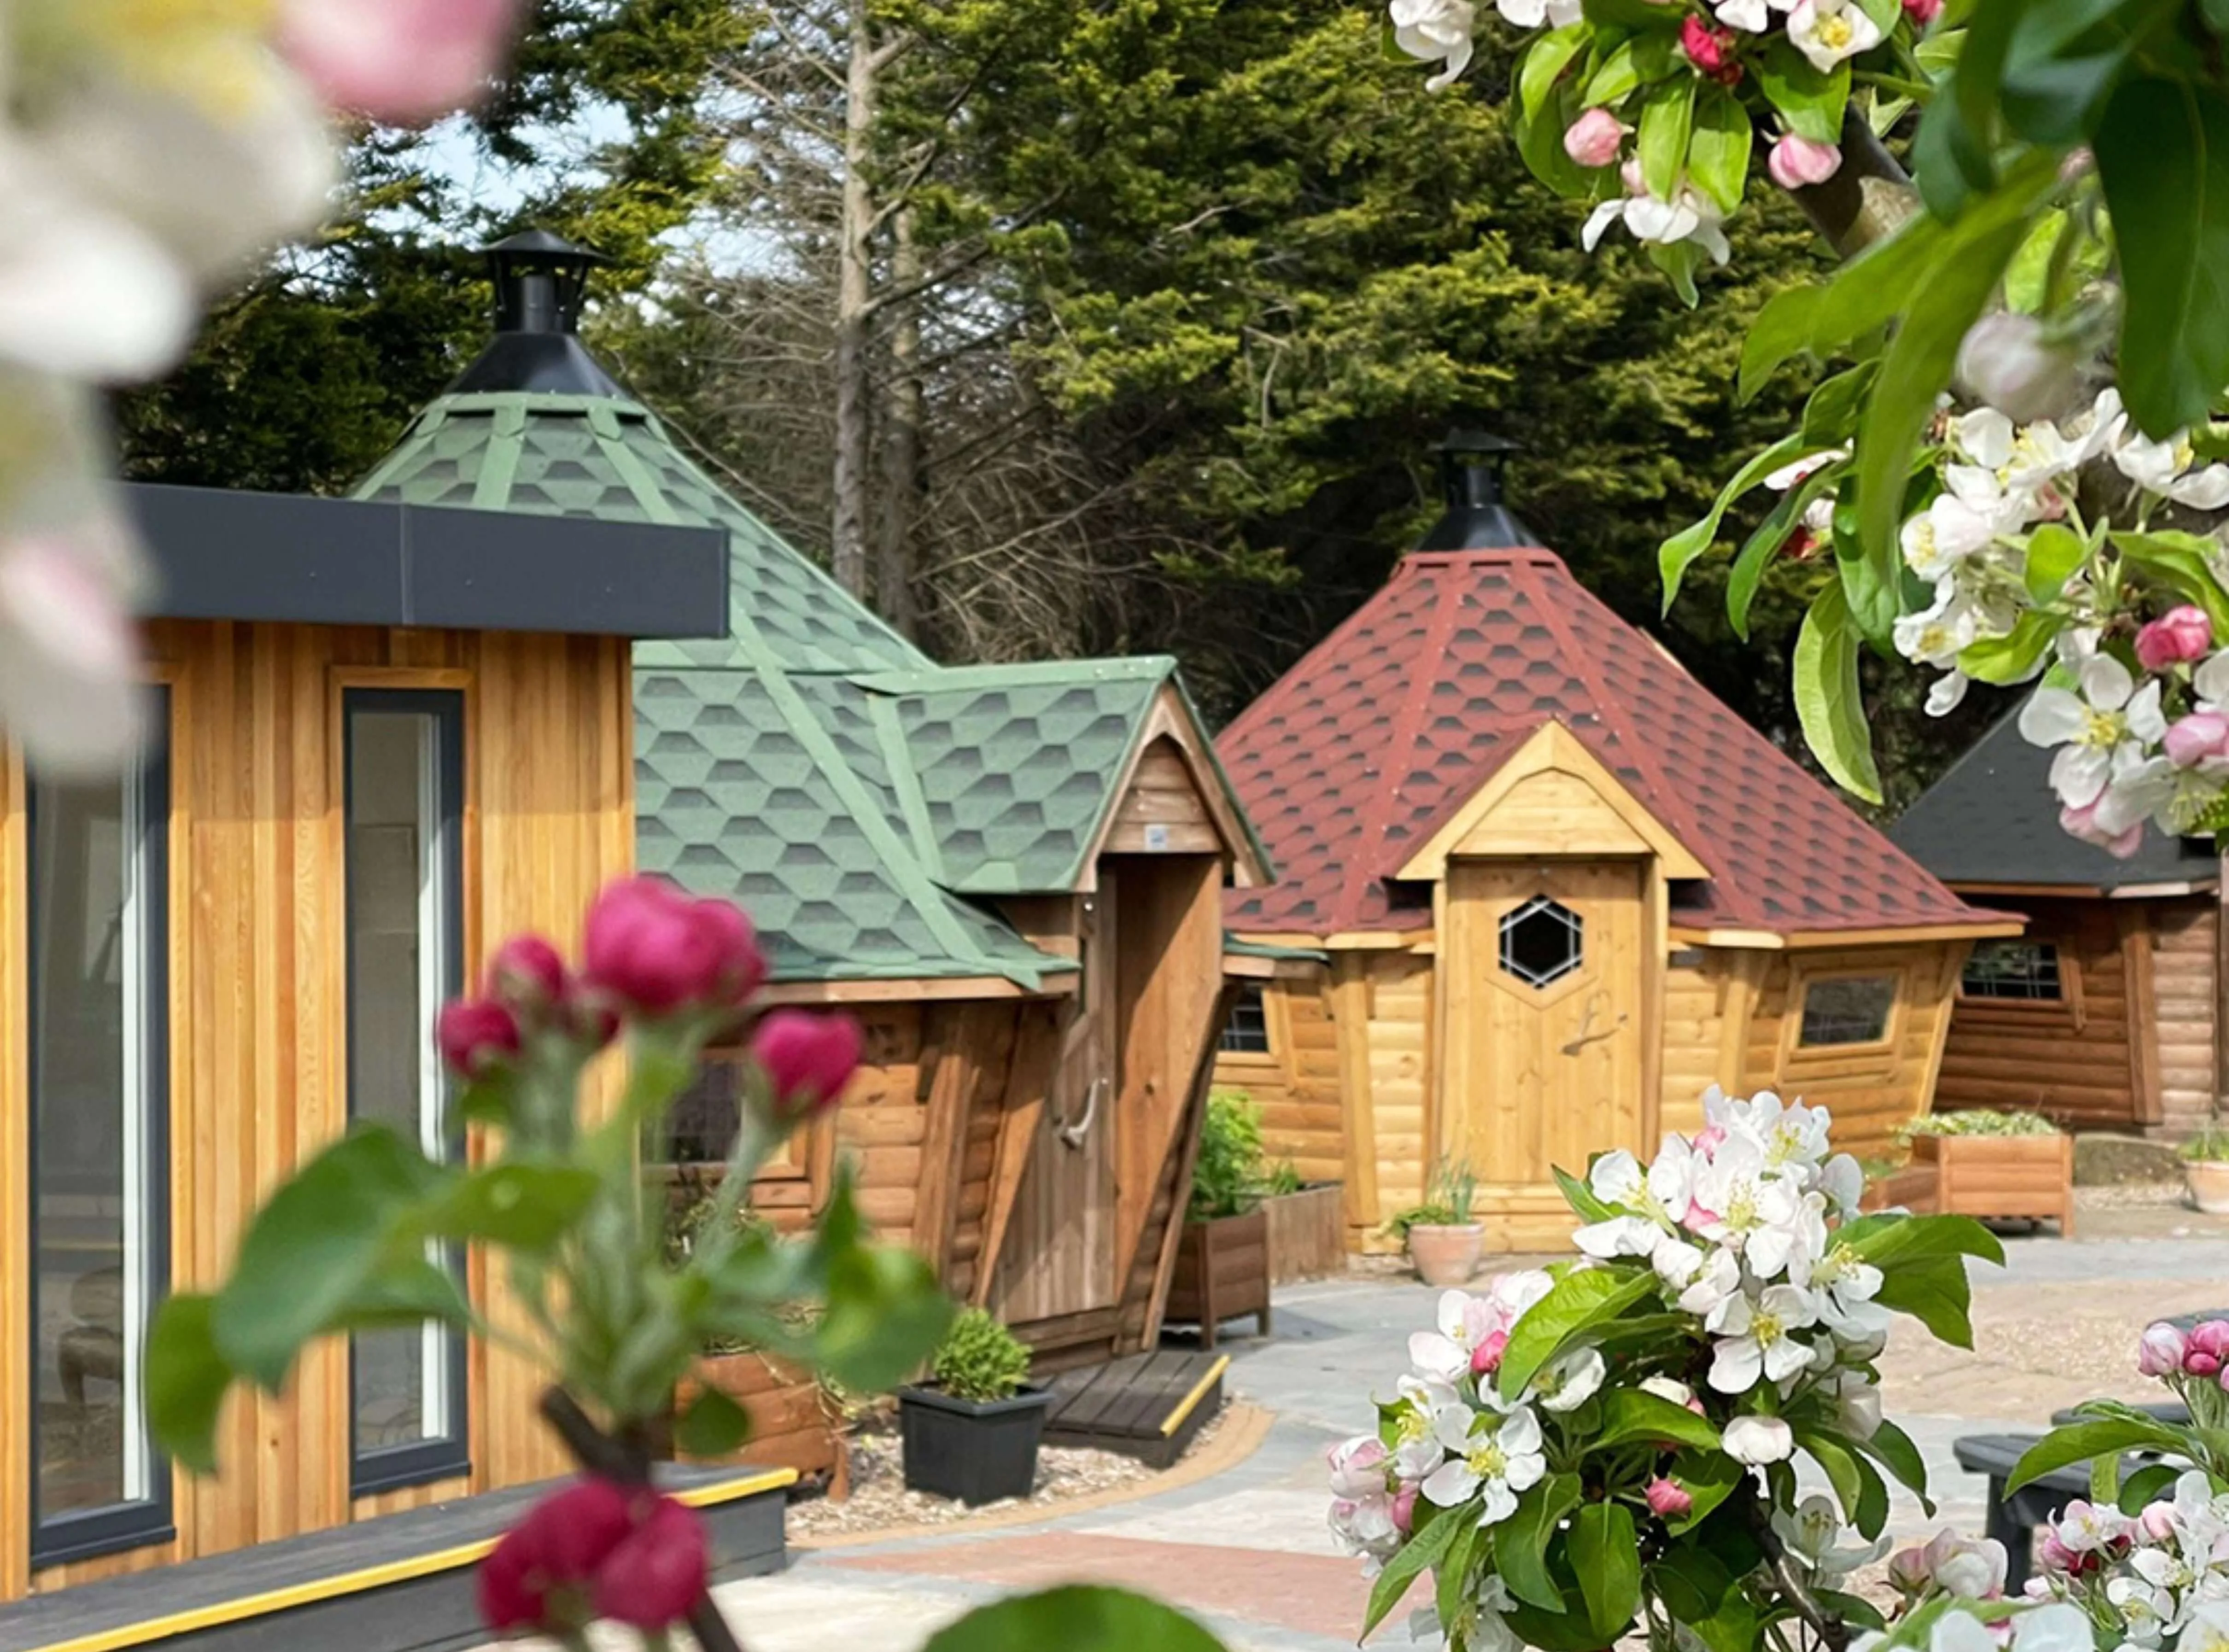 Arctic Cabins Nottingham Show Site with red and green roofs with roses and pink and white tulips